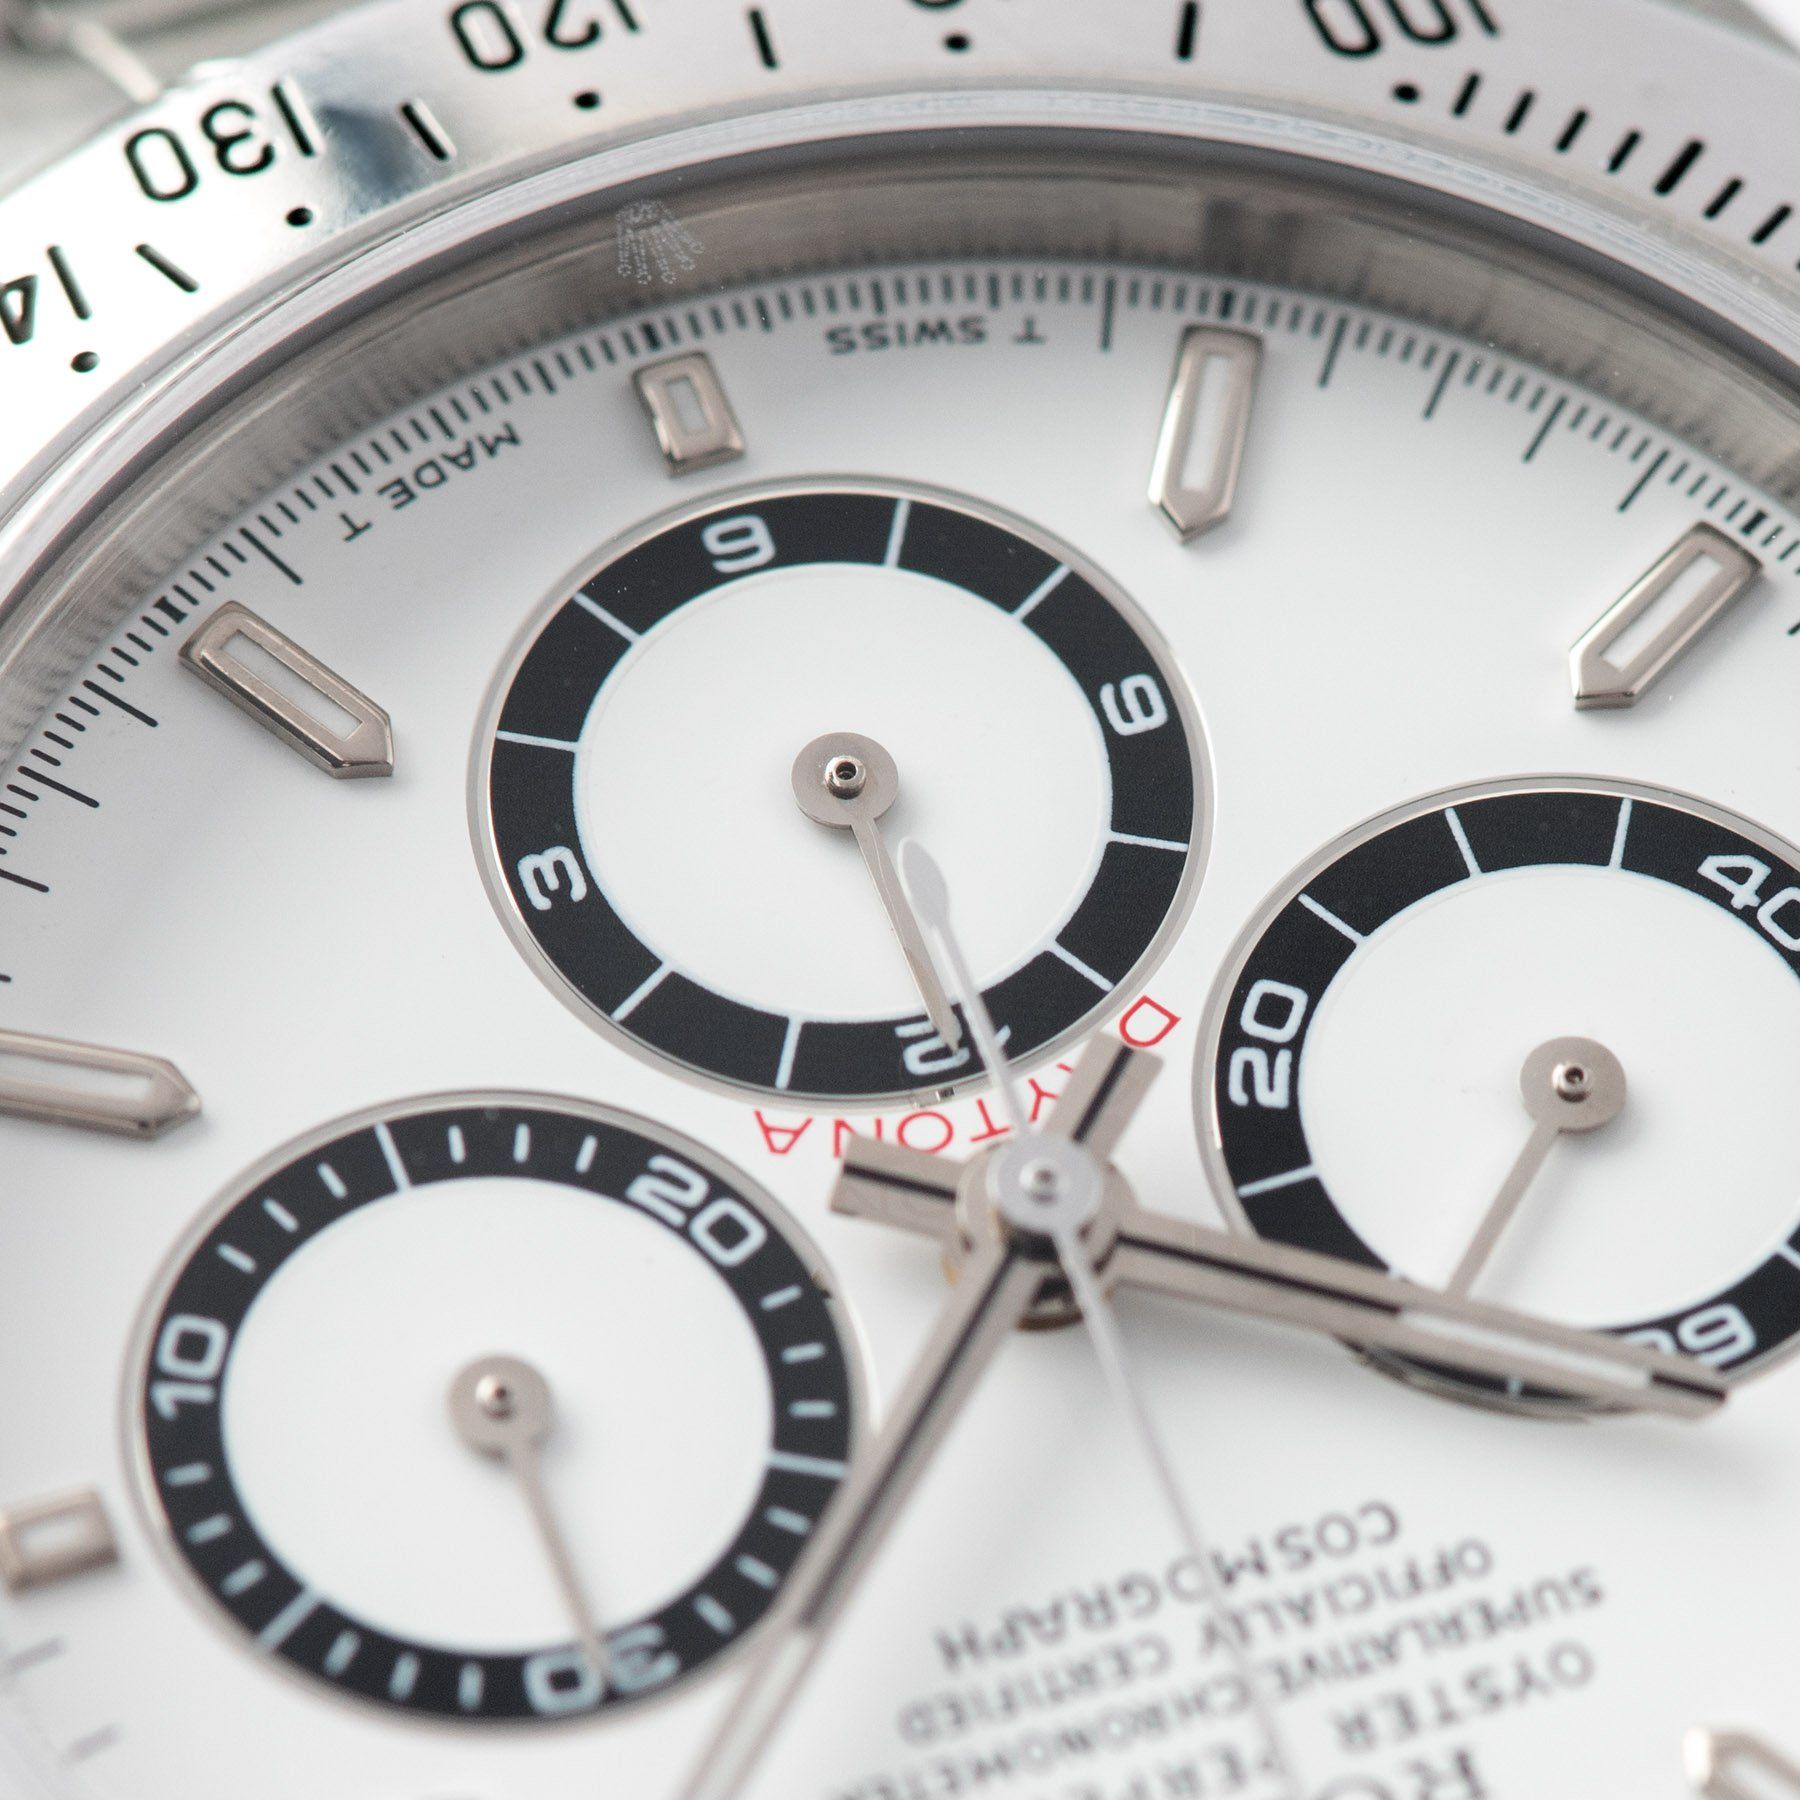 Rolex Daytona Steel 16520 White Dial with  ‘T SWISS MADE T’ markings